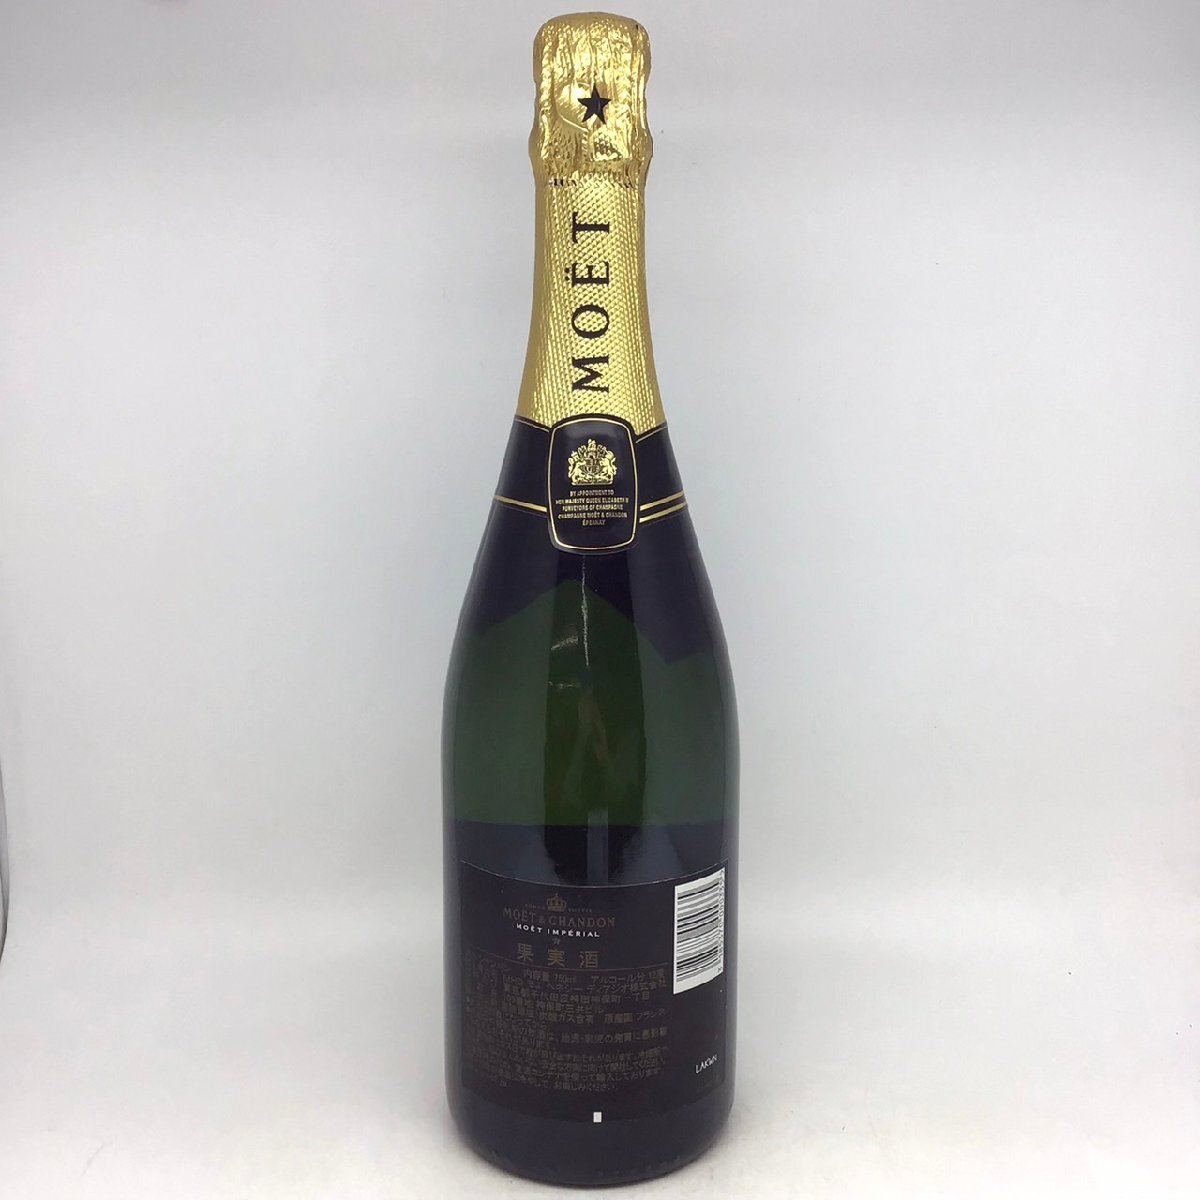  not yet . plug Moet&Chandon Anne pe real yellowtail .to750ml 12% 4W-26-2-153056-A